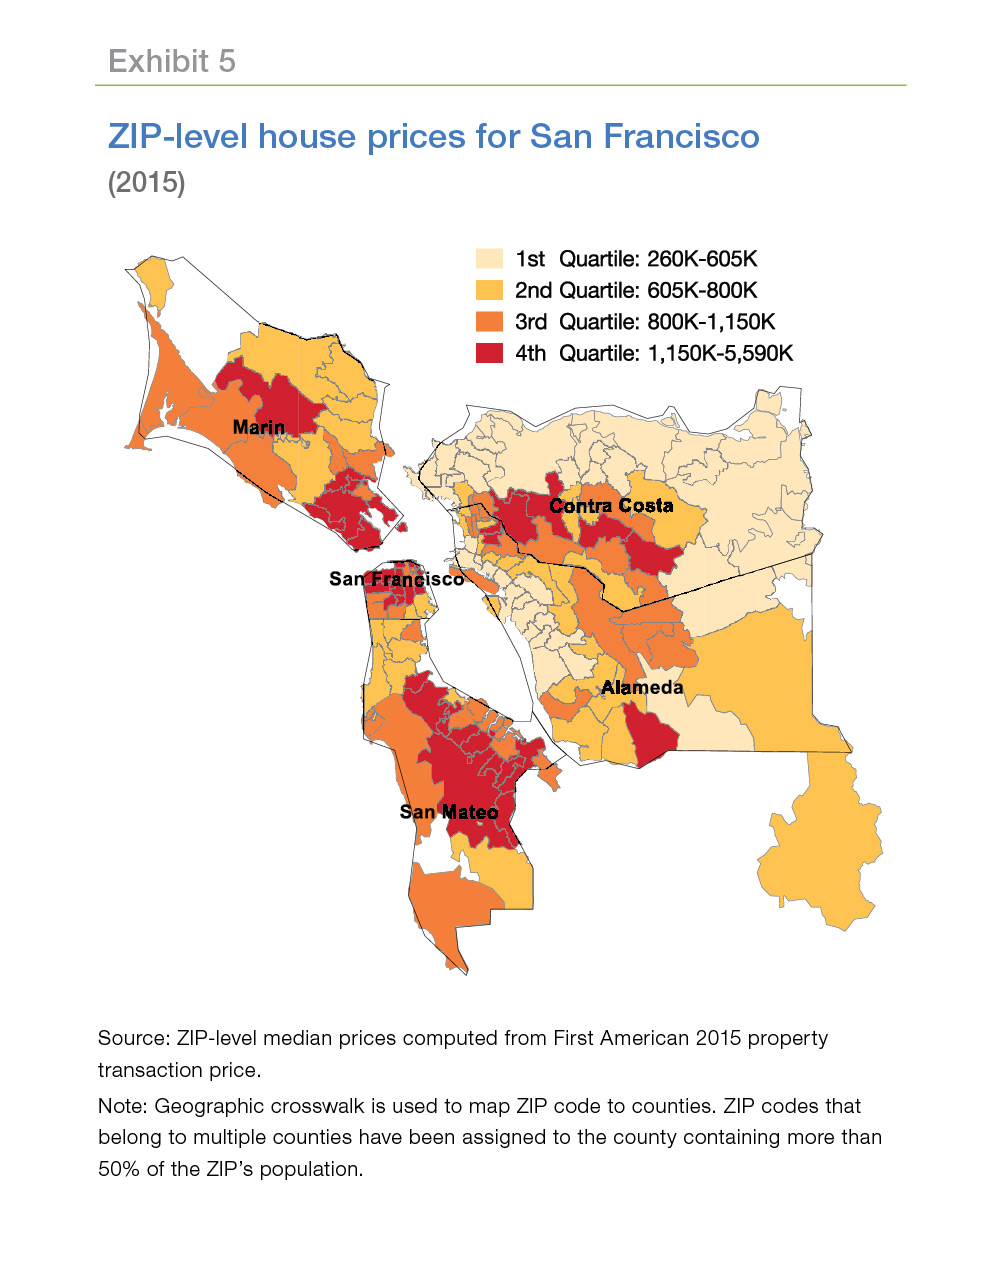 Maps showing ZIP-level house prices for San Francisco (2015)